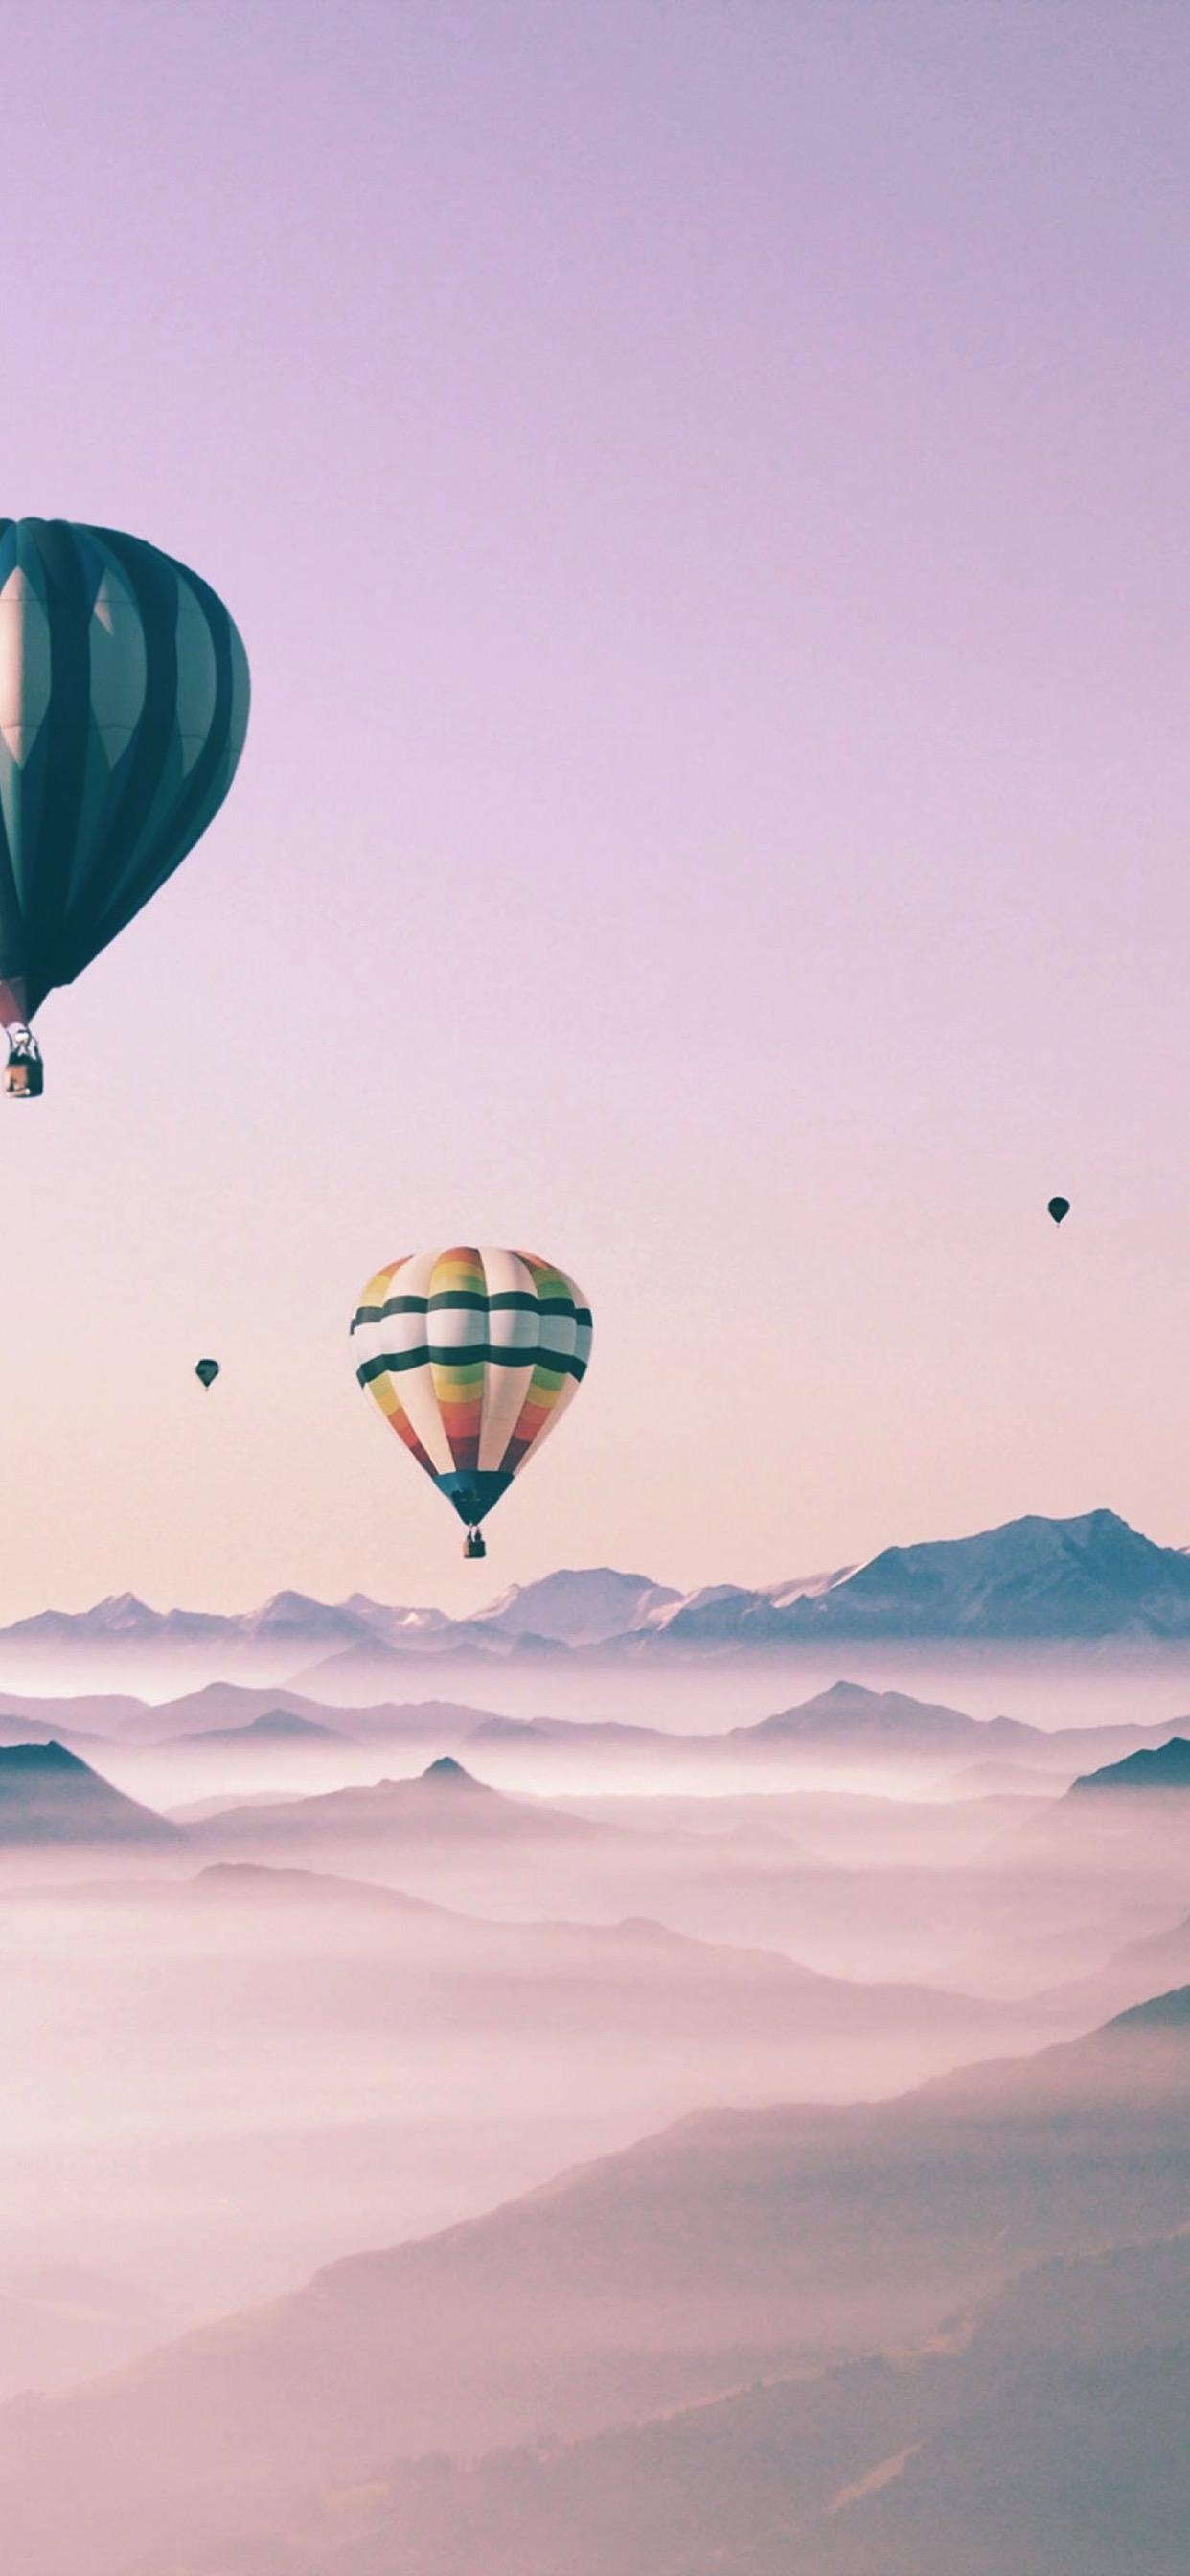 Hot Air Balloon: Wind Force, Buoyancy, Panoramic View Of Mountain Region, Aeronaut. 1250x2690 HD Background.